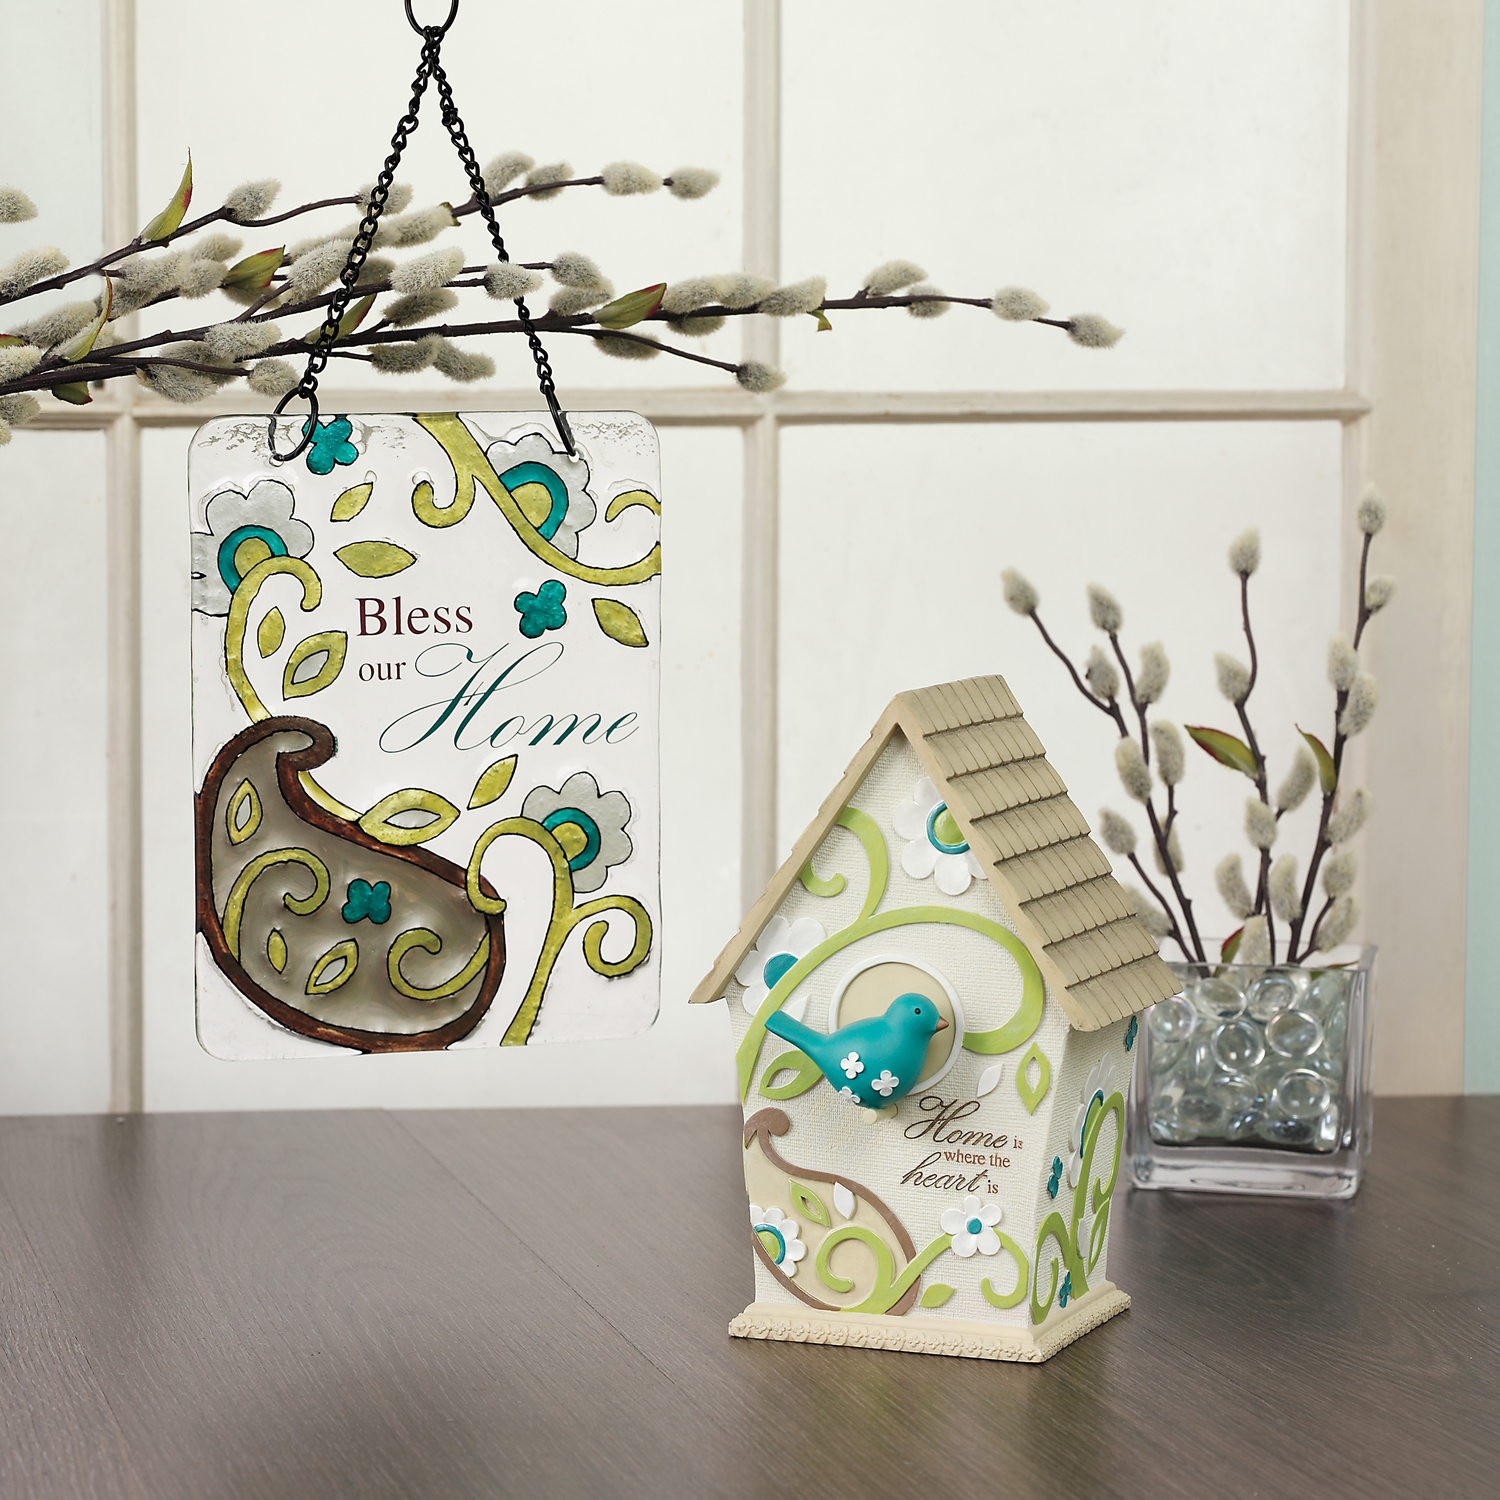 Pavilion Gift Company Perfectly Paisley Home Decorative Birdhouse, Inscription Home is Where The Heart is - image 2 of 3